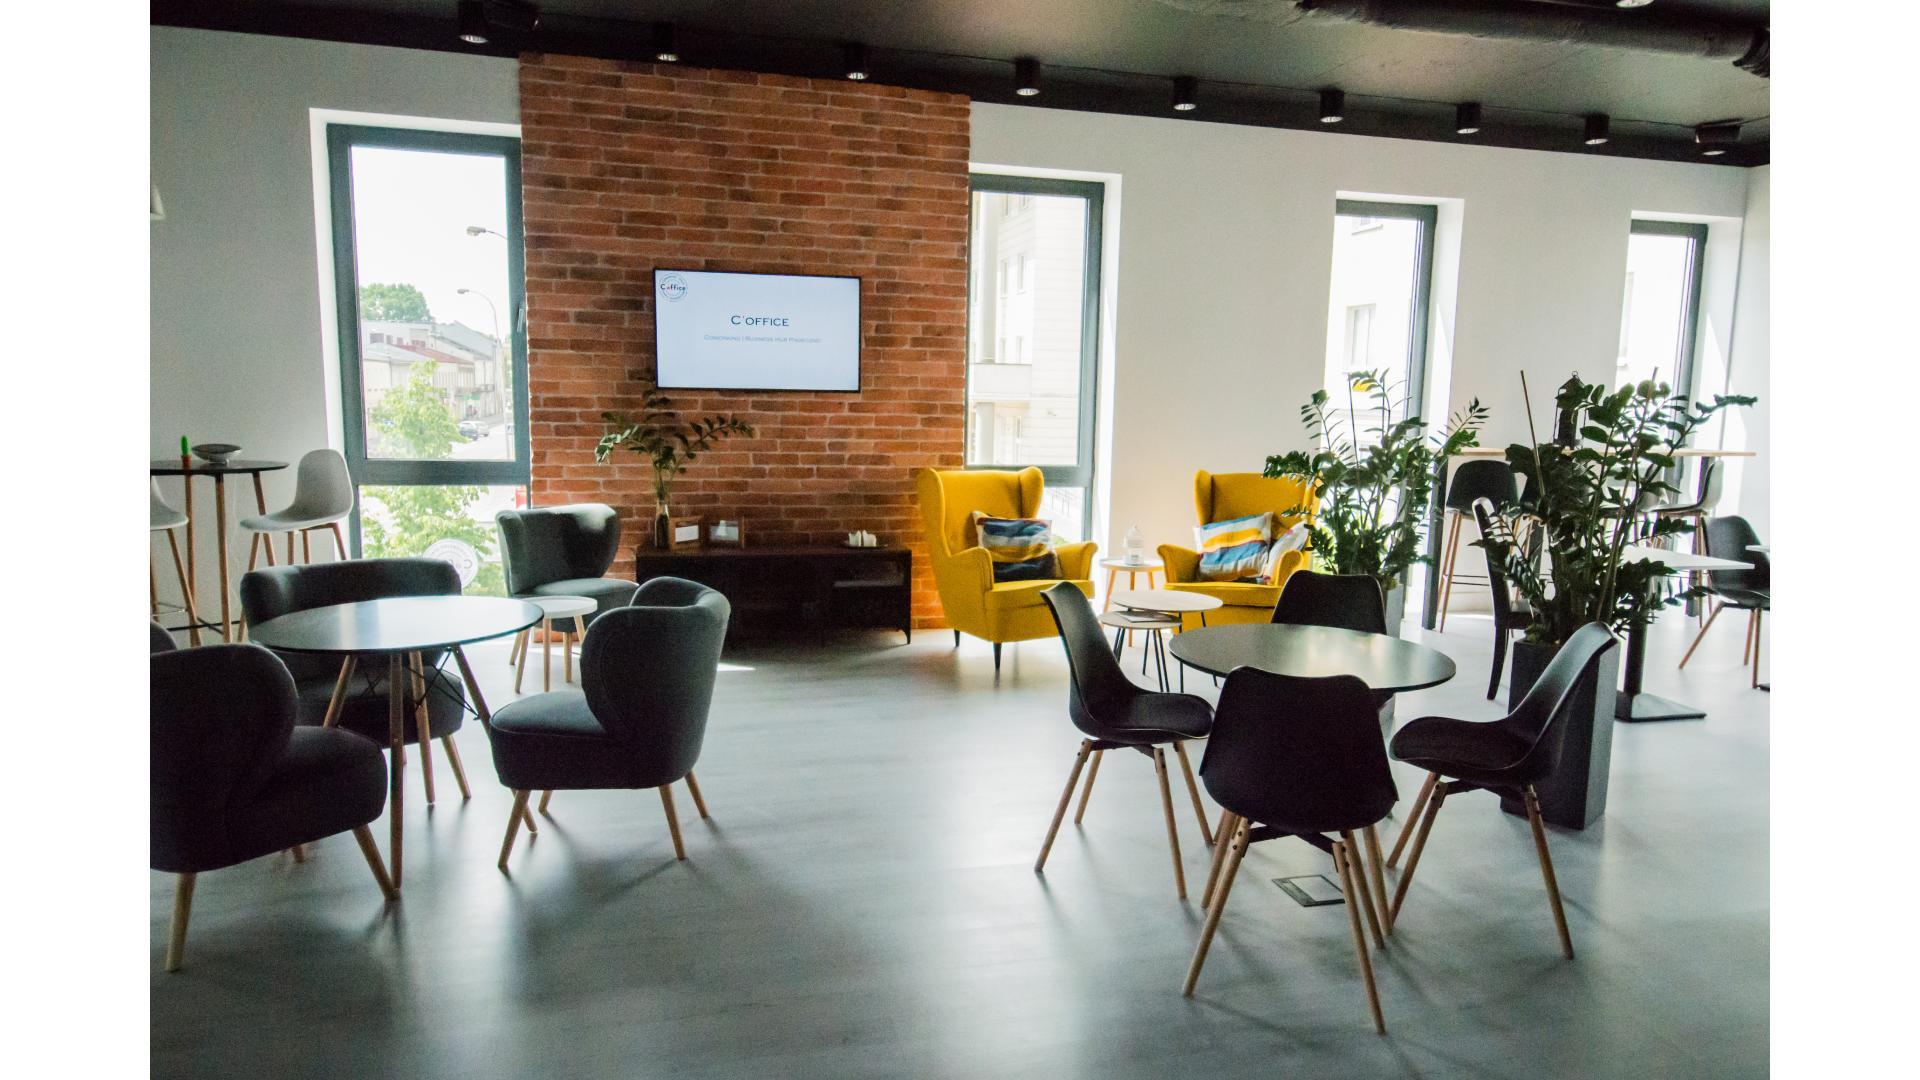 C office Coworking I Business Hub beltere